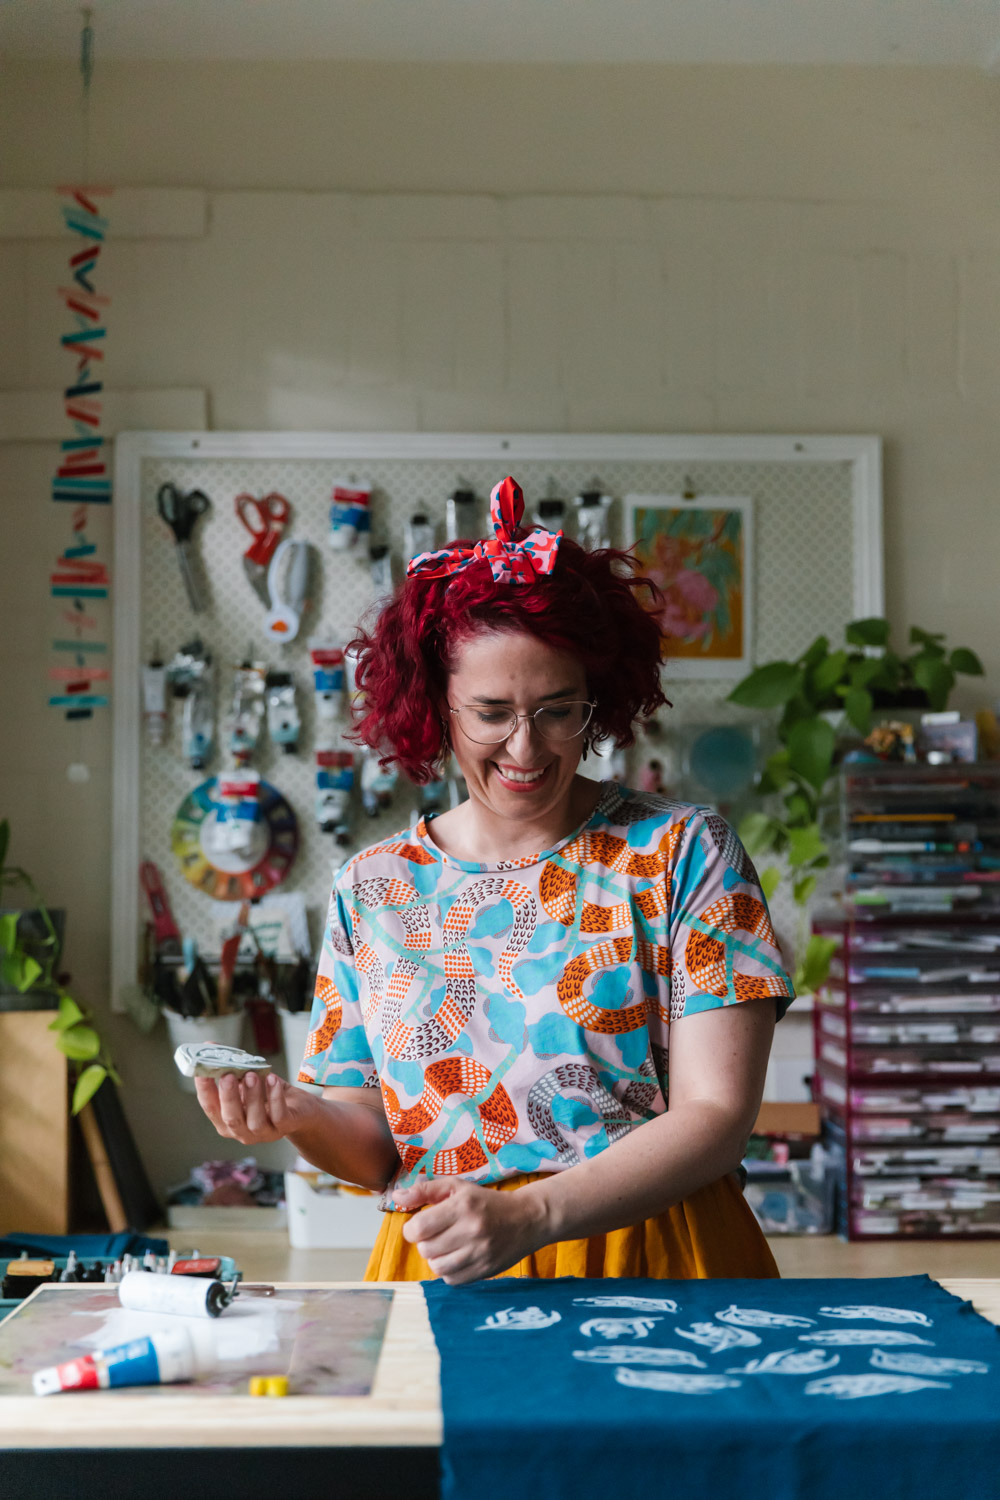 Portrait of a woman laughing while she block prints by hand onto navy fabric in her creative studio space